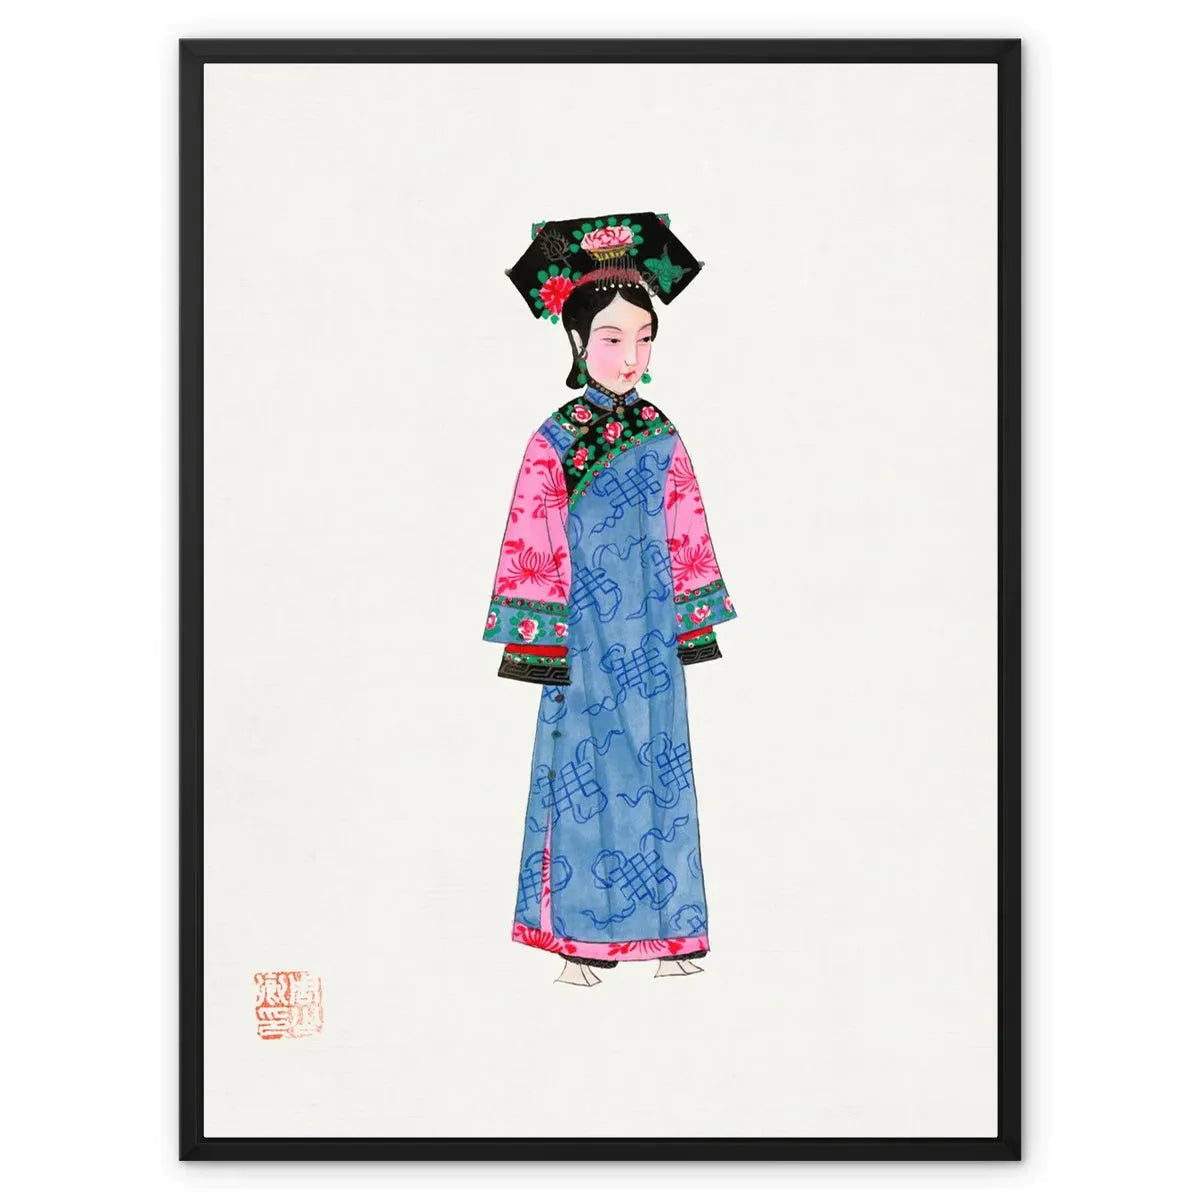 Chinese Noblewoman Too Framed Canvas - 24’x32’ / Black Frame / White Wrap - Posters Prints & Visual Artwork